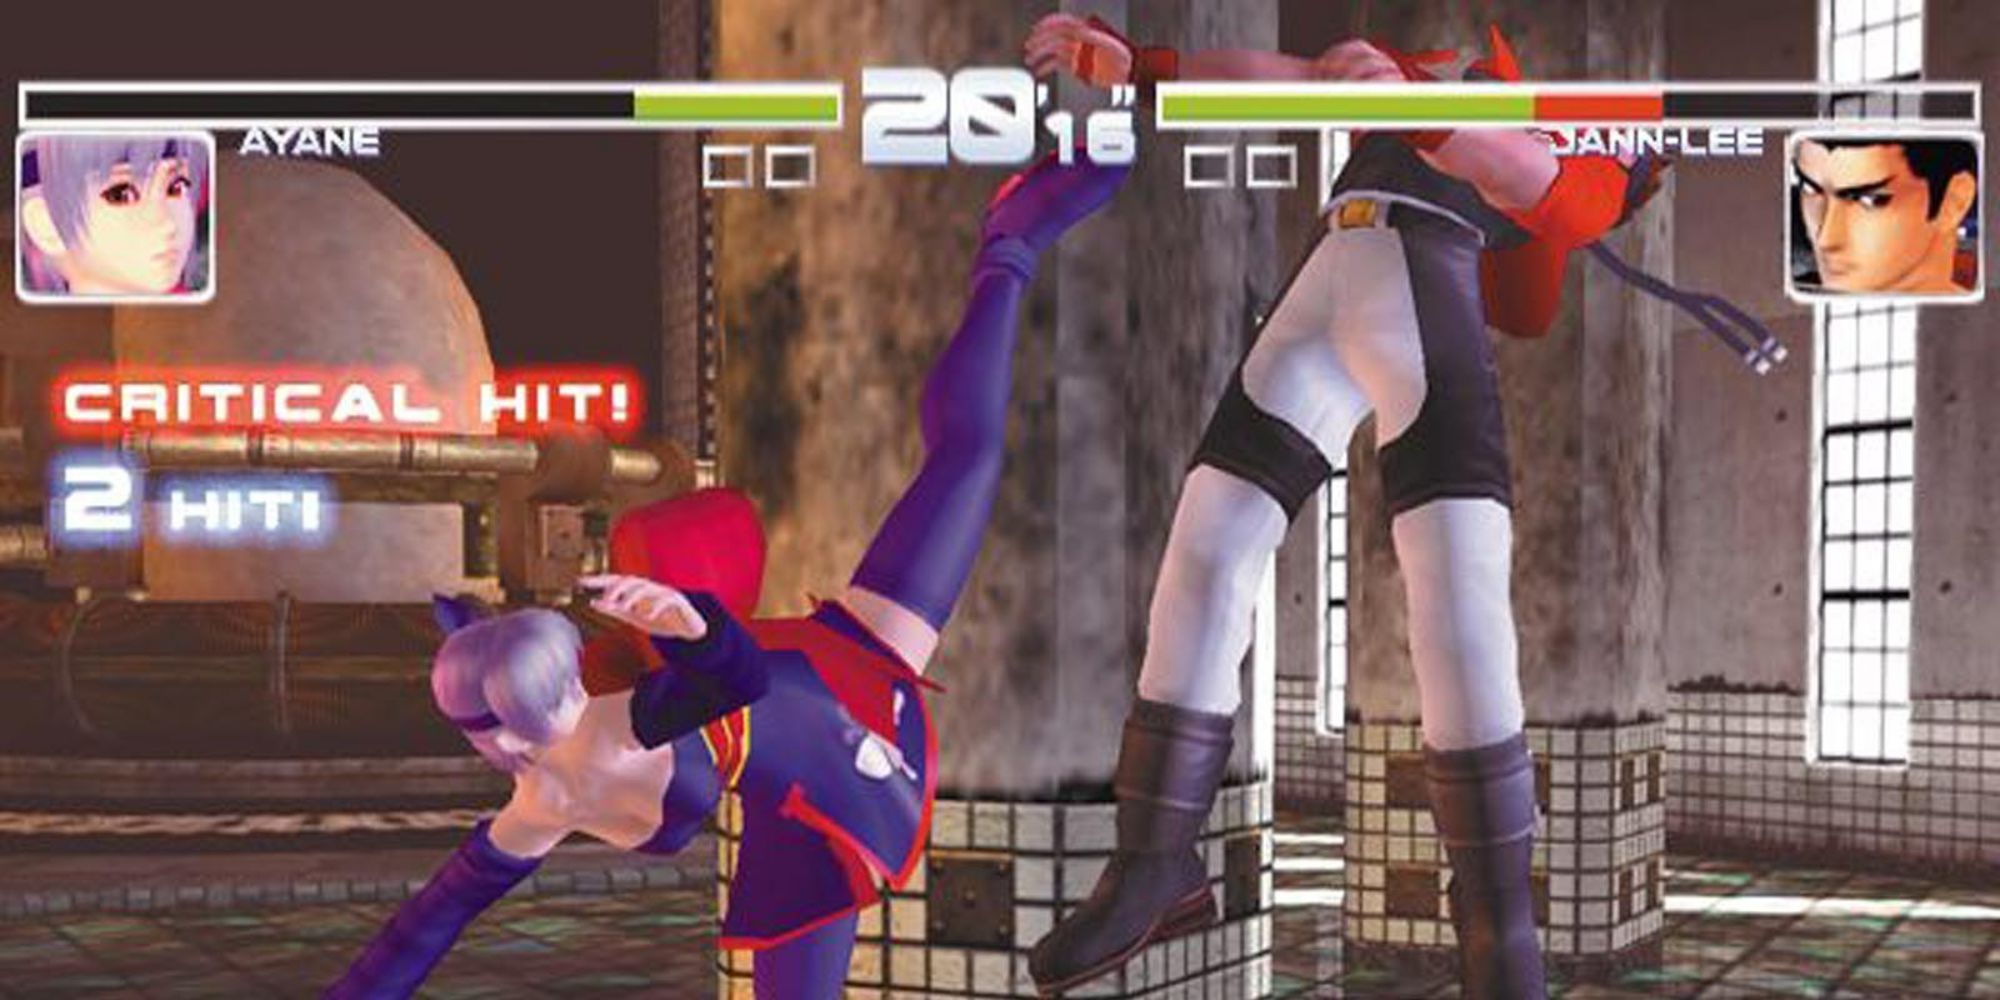 Ayane and Jann-Lee fighting in DOA 2: Hardcore